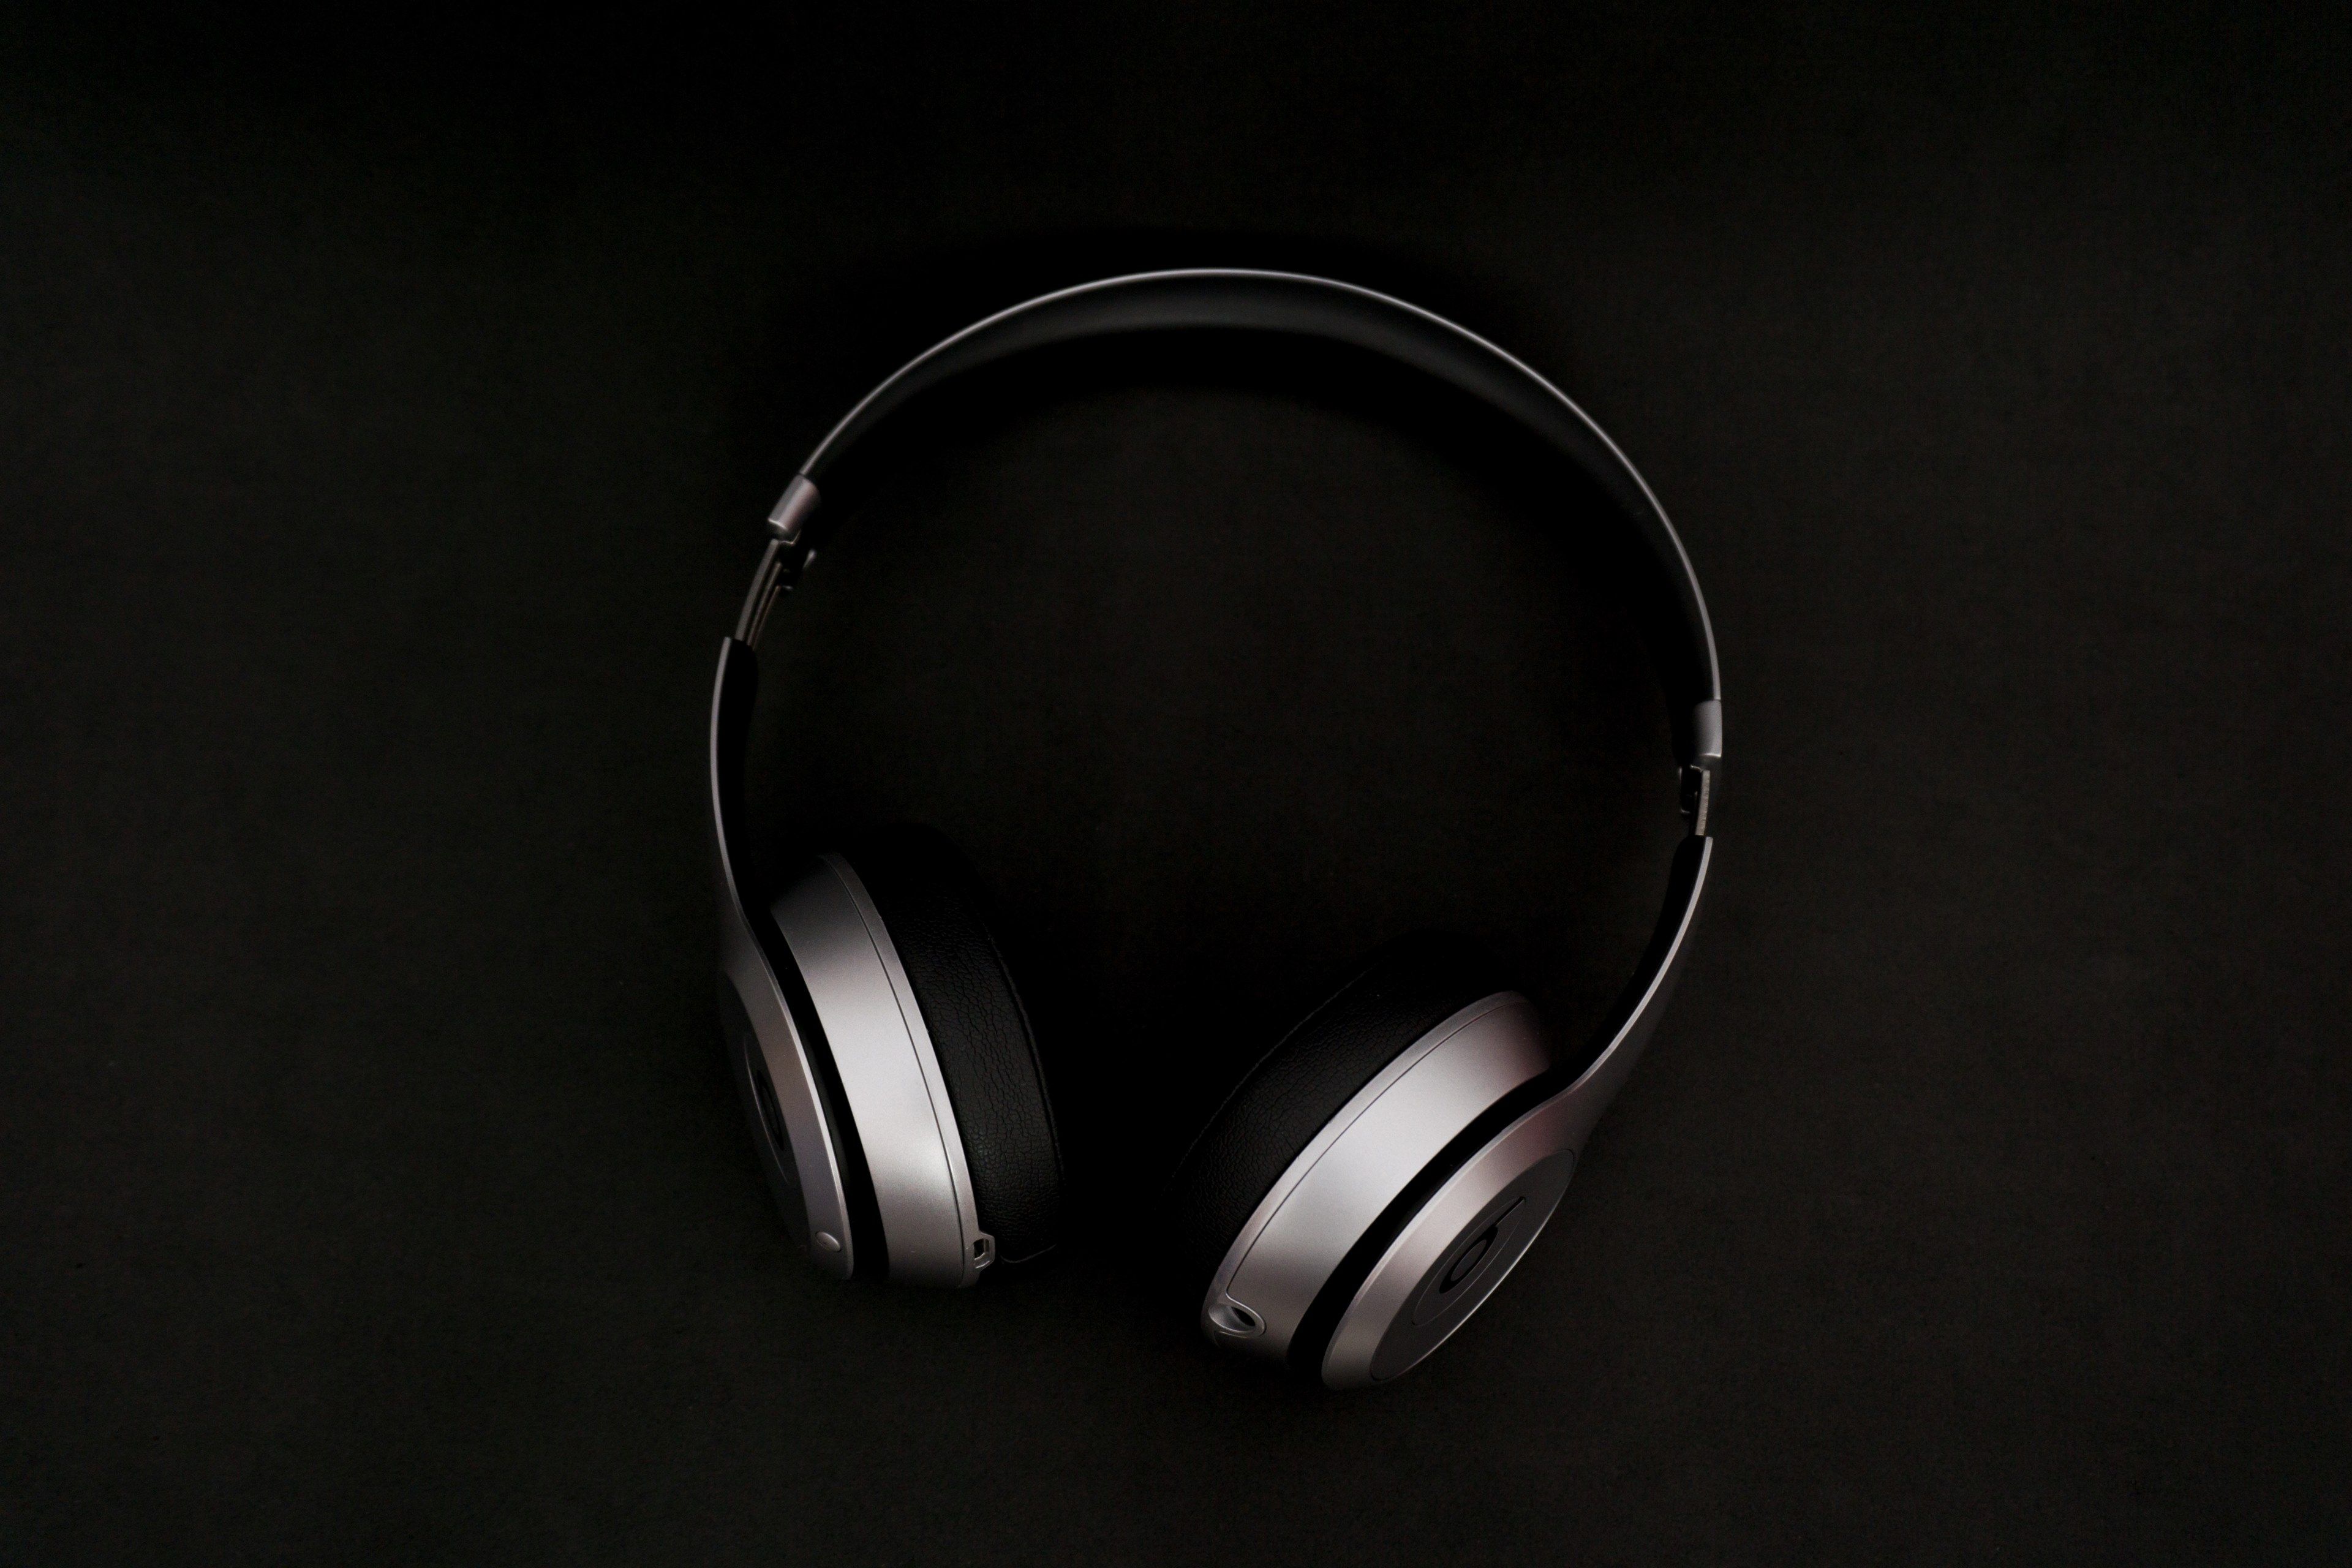 silver and black earphones in black background standing